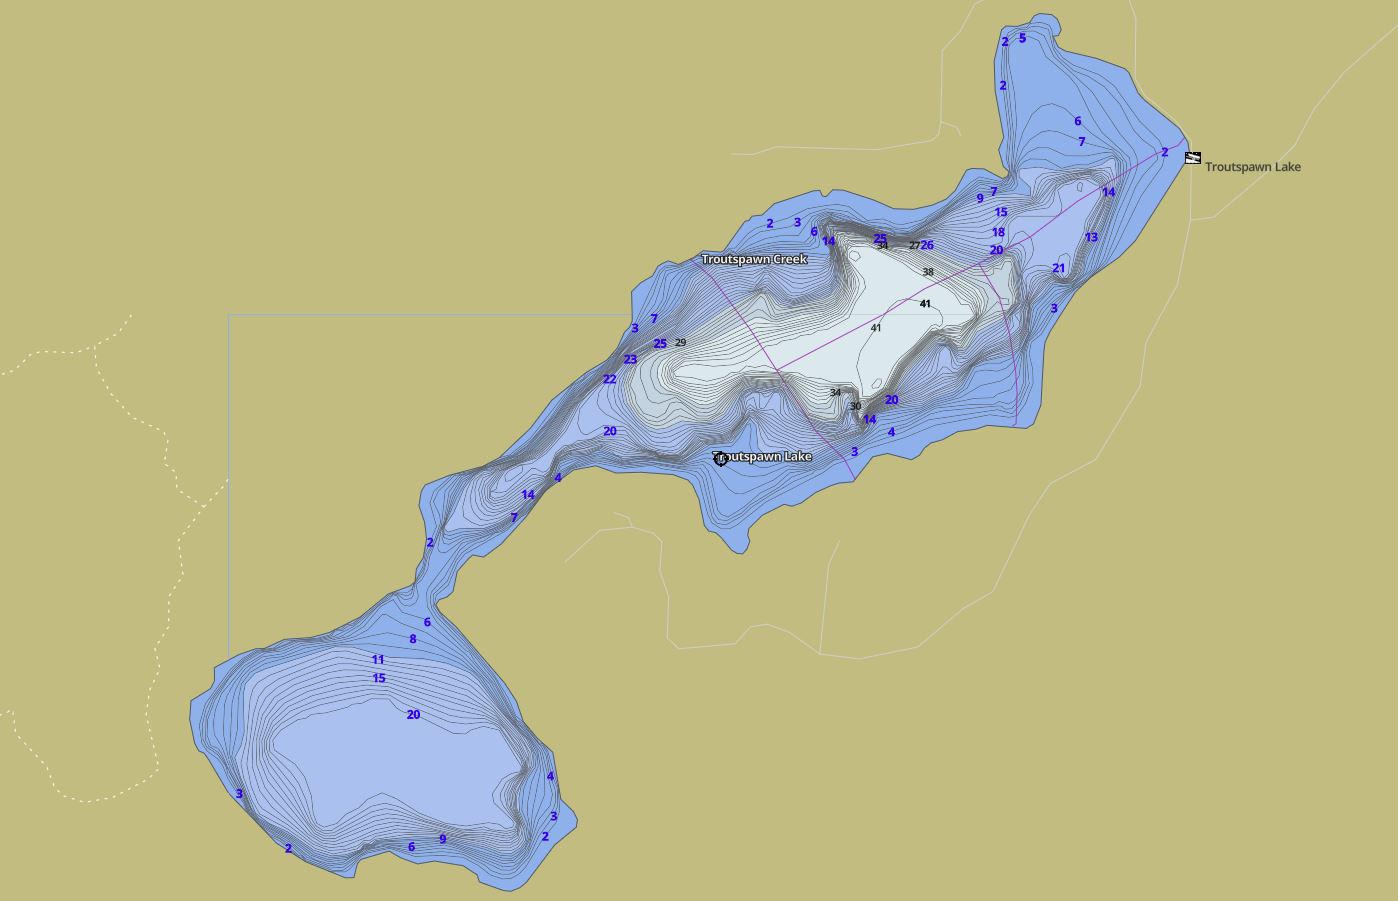 Contour Map of Troutspawn Lake in Municipality of Algonquin Highlands and the District of Haliburton